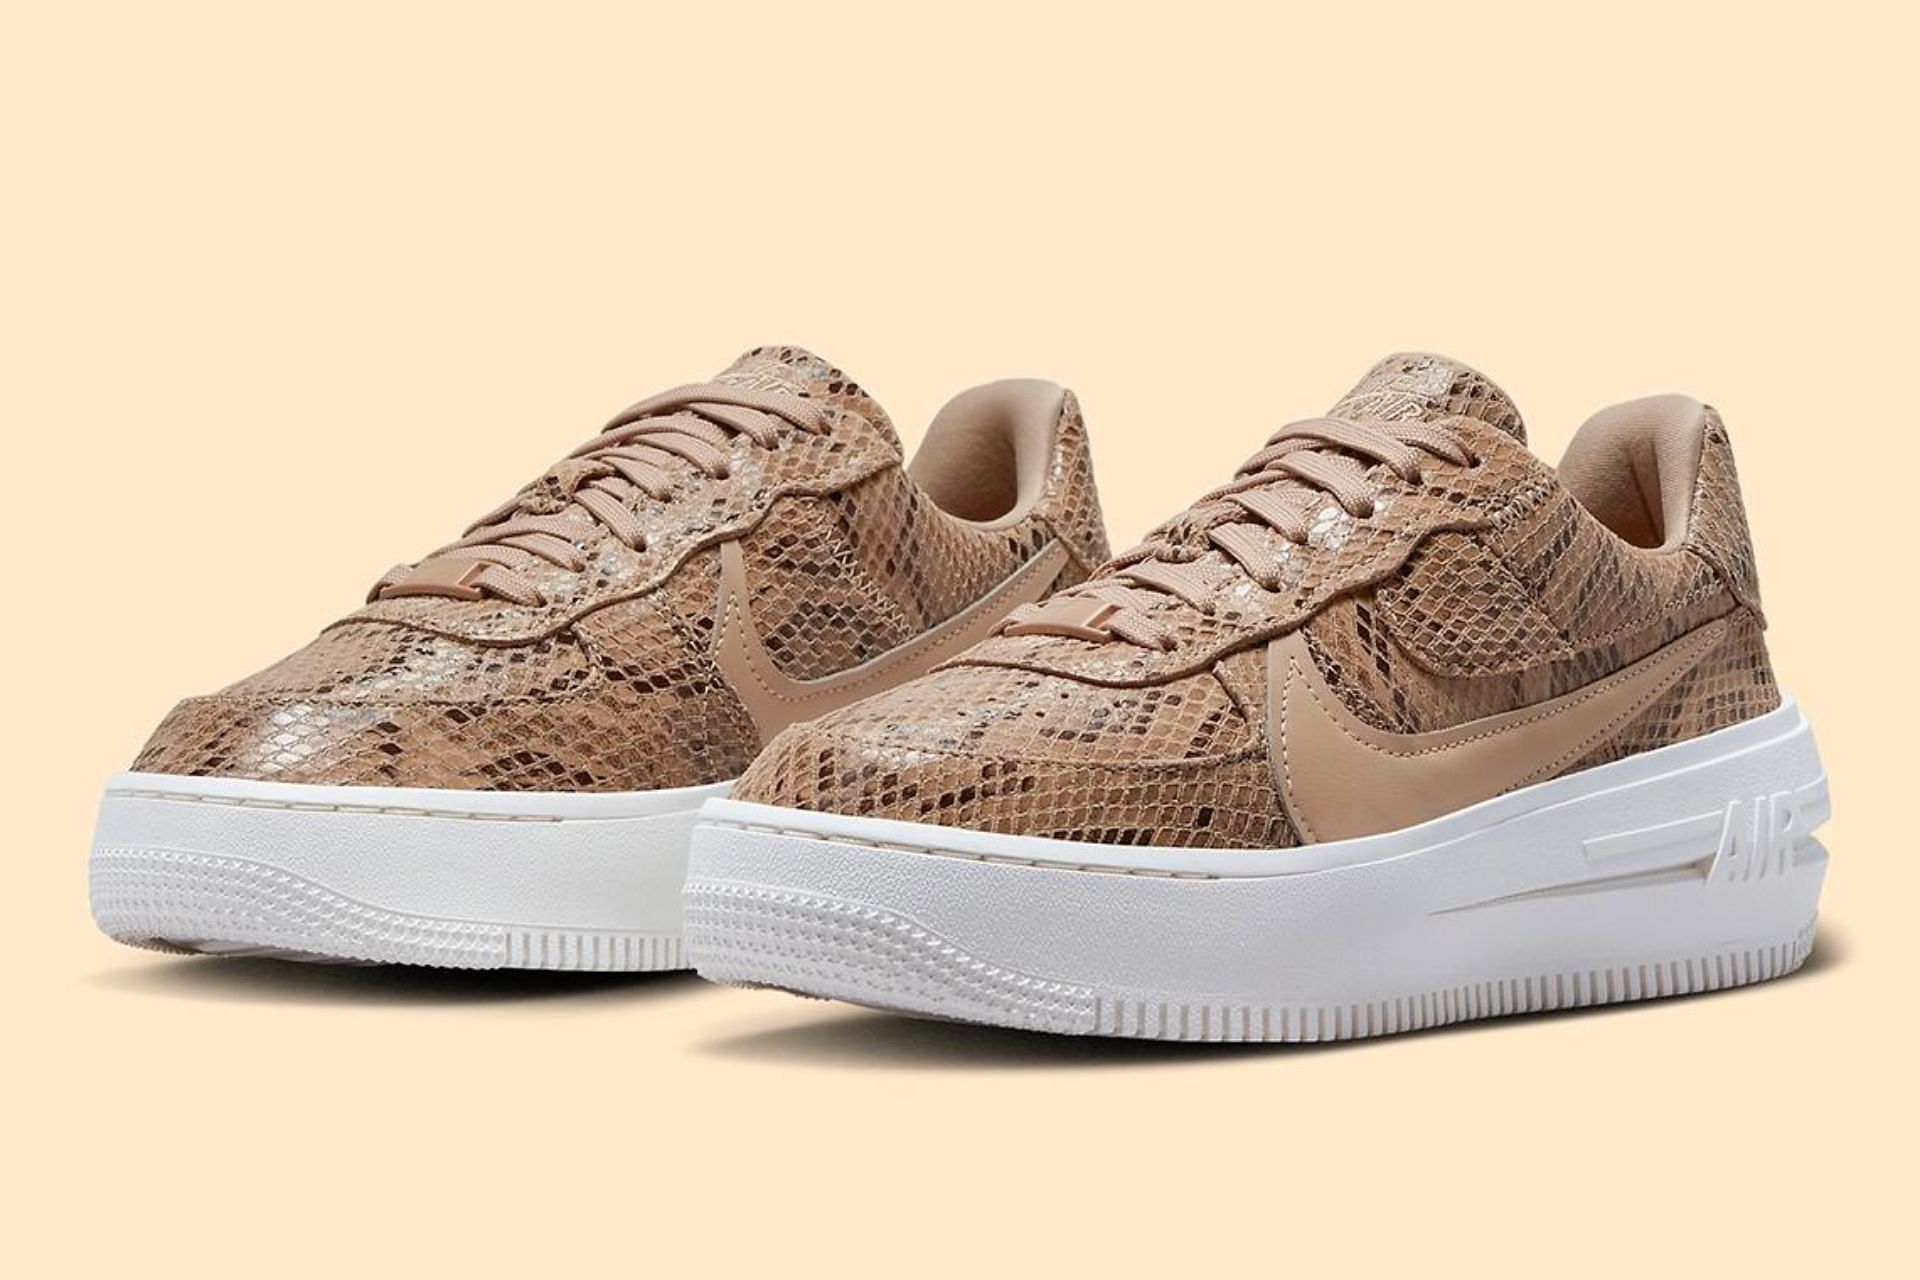 Nike Air Force 1 Platform "Snakeskin" sneakers: Where to buy, more explored